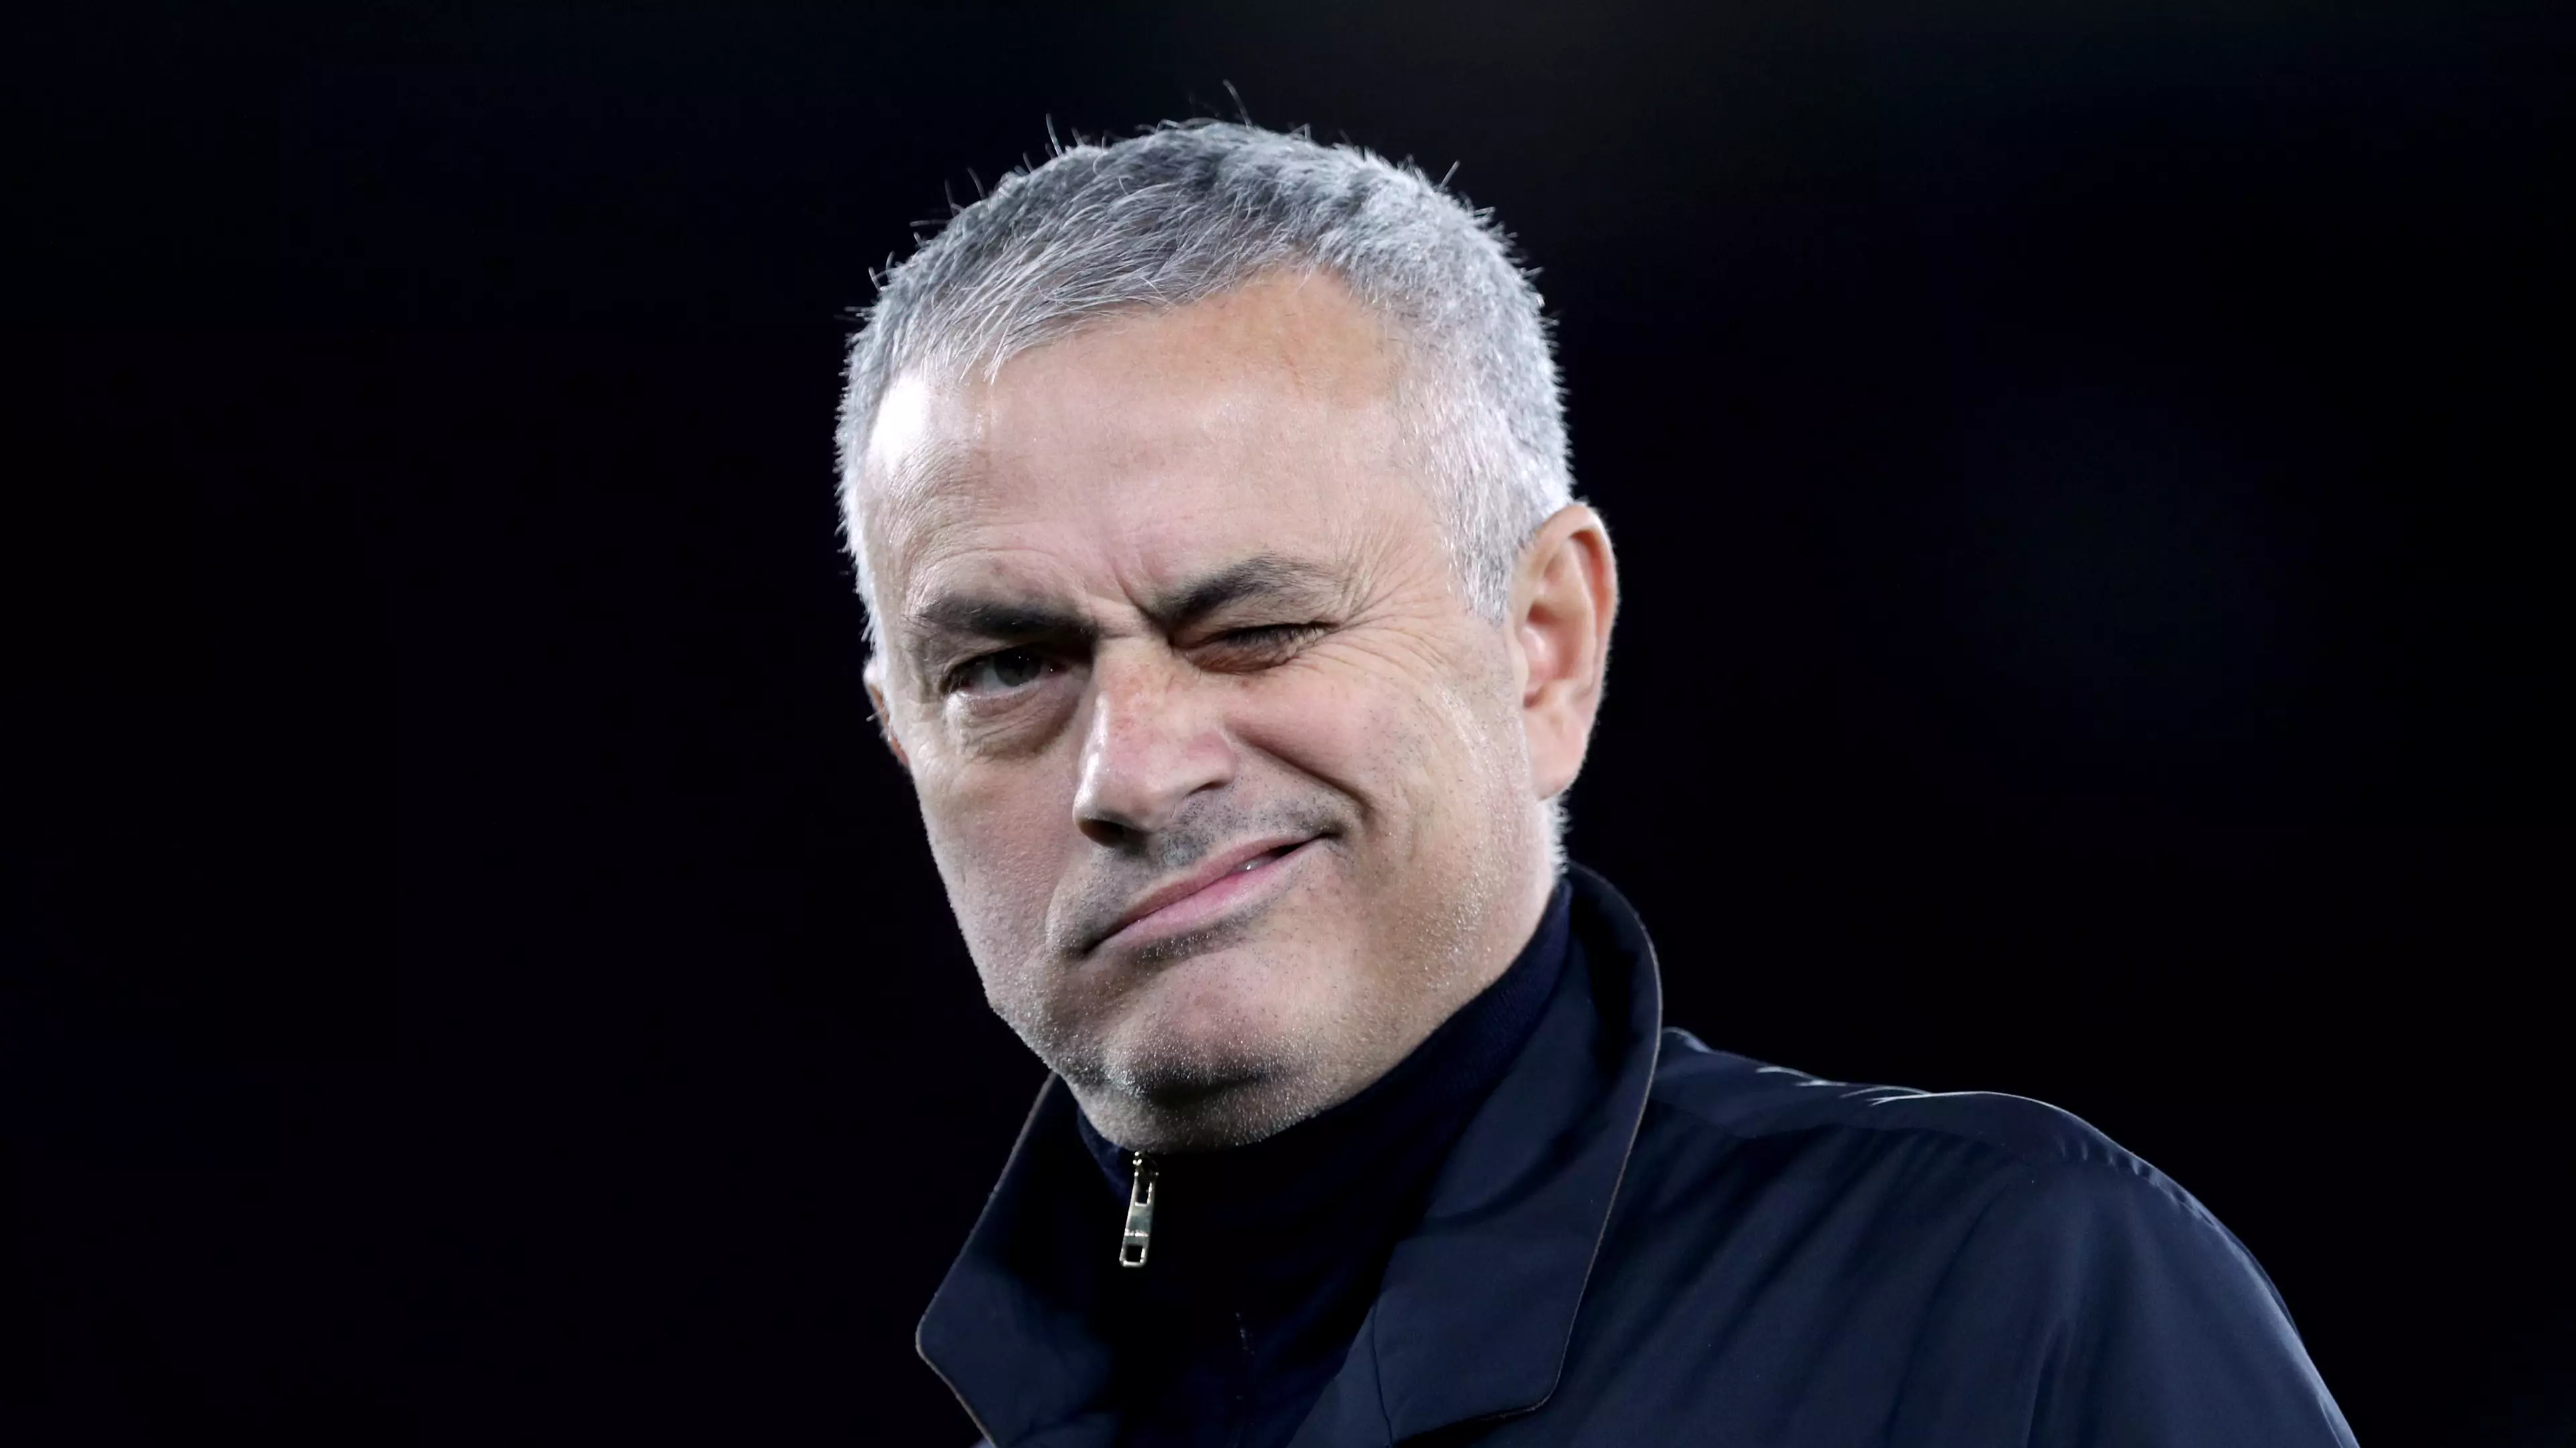 Jose Mourinho Names The League He Wants To Manage In